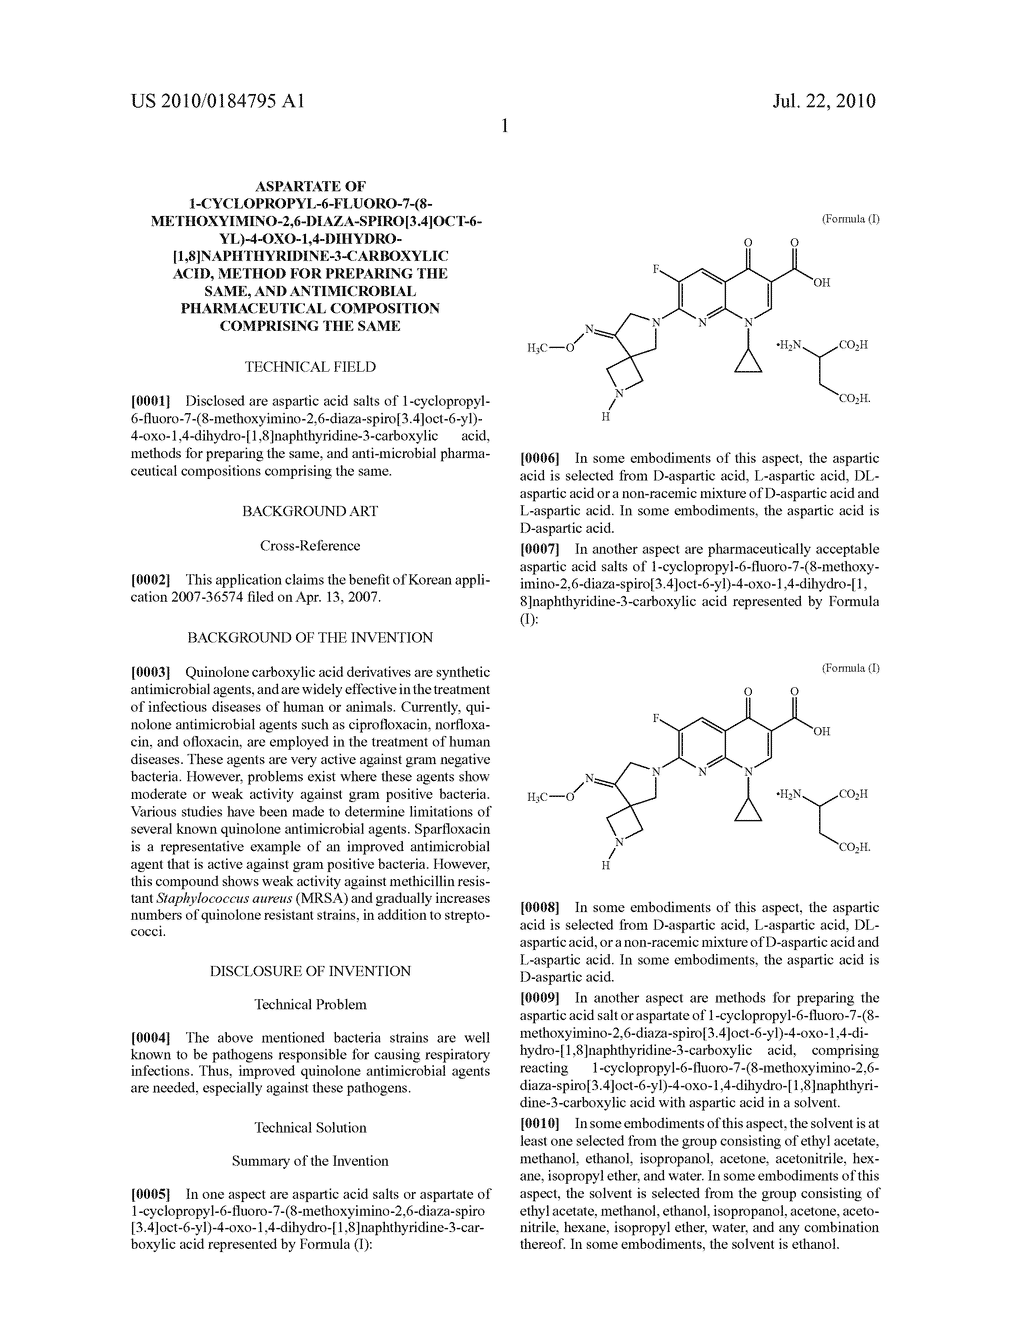 ASPARTATE OF 1-CYCLOPROPYL-6-FLUORO-7-(8-METHOXYIMINO-2,6-DIAZA-SPIRO[3.4]OCT-6-YL)-4-- OXO-1,4-DIHYDRO-[1,8]NAPHTHYRIDINE-3-CARBOXYLIC ACID, METHOD FOR PREPARING THE SAME, AND ANTIMICROBIAL PHARMACEUTICAL COMPOSITION COMPRISING THE SAME - diagram, schematic, and image 02